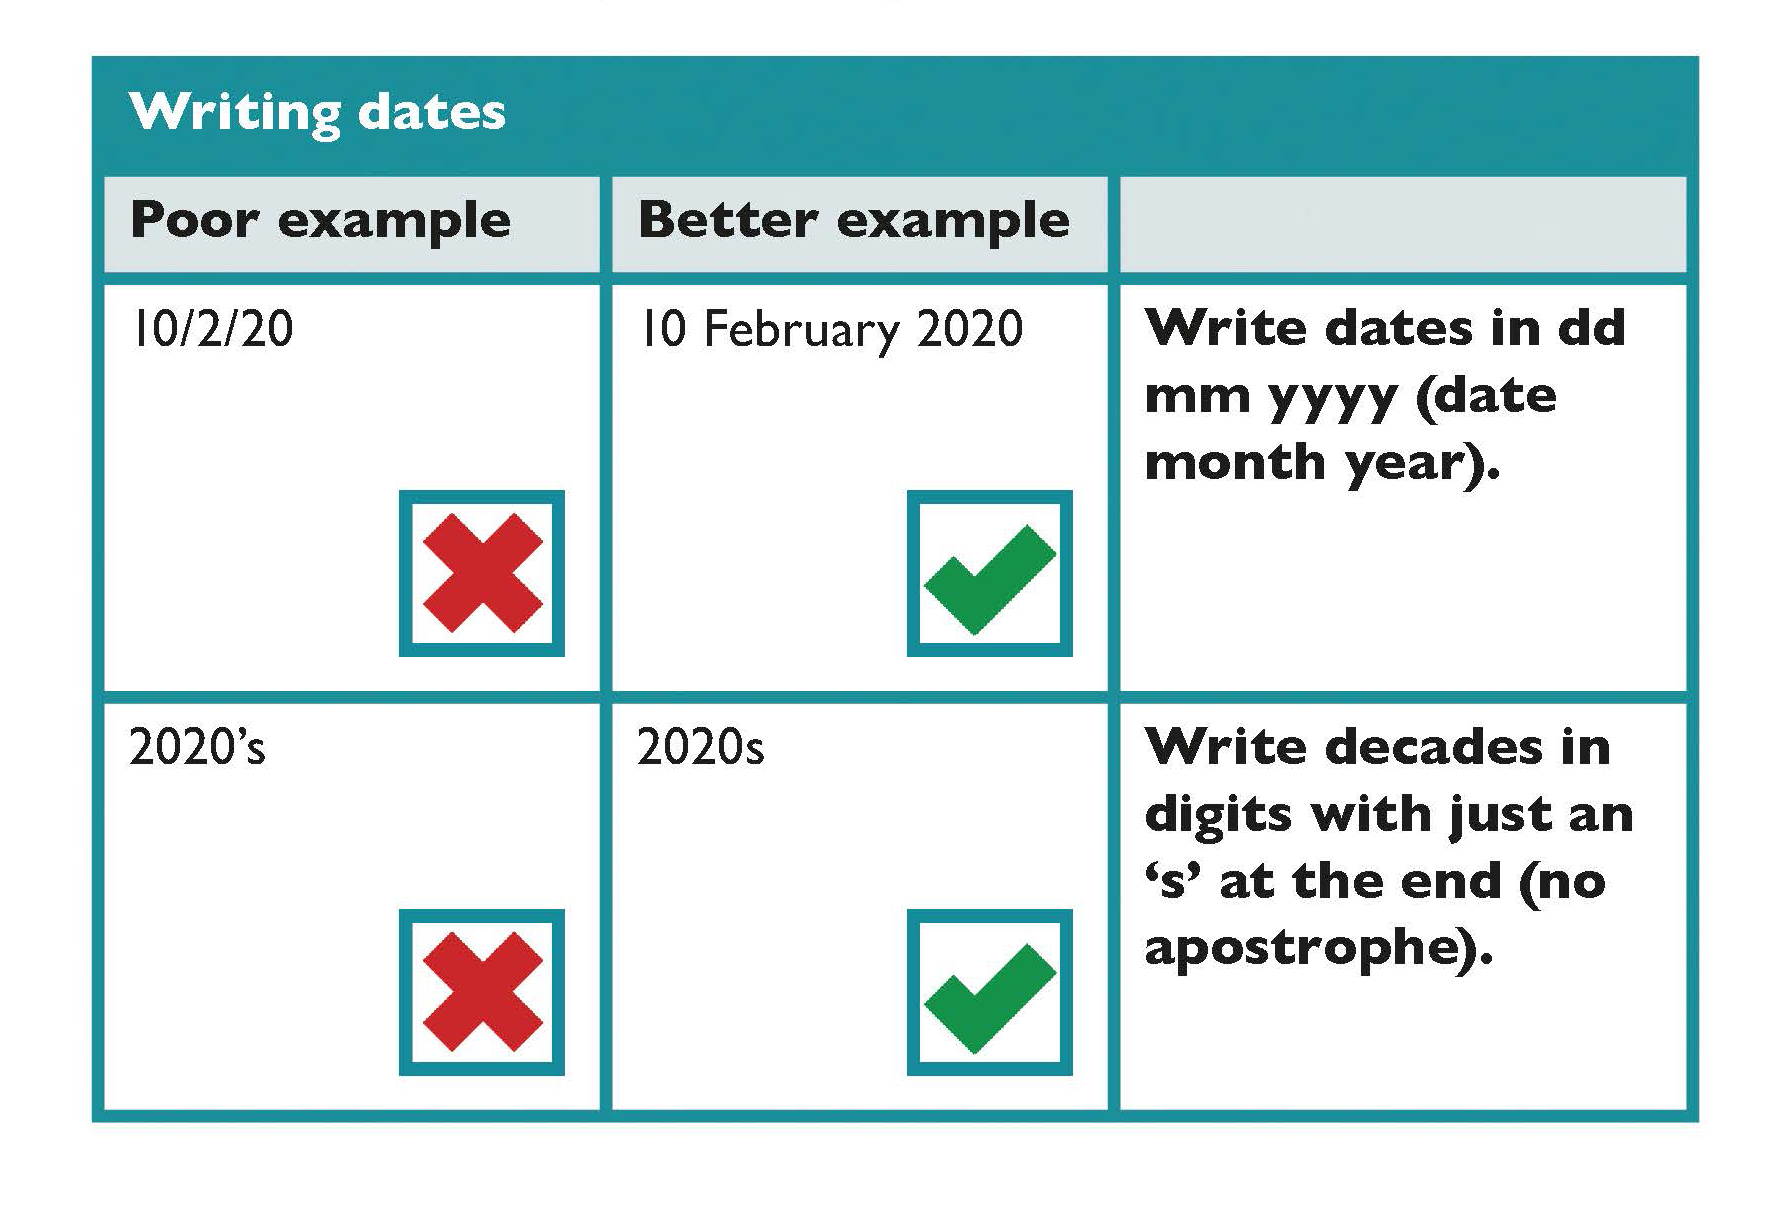 Write dates in dd mm yyyy(date, month year). Write decades in digits with just an 's' at the end (no apostrophe)